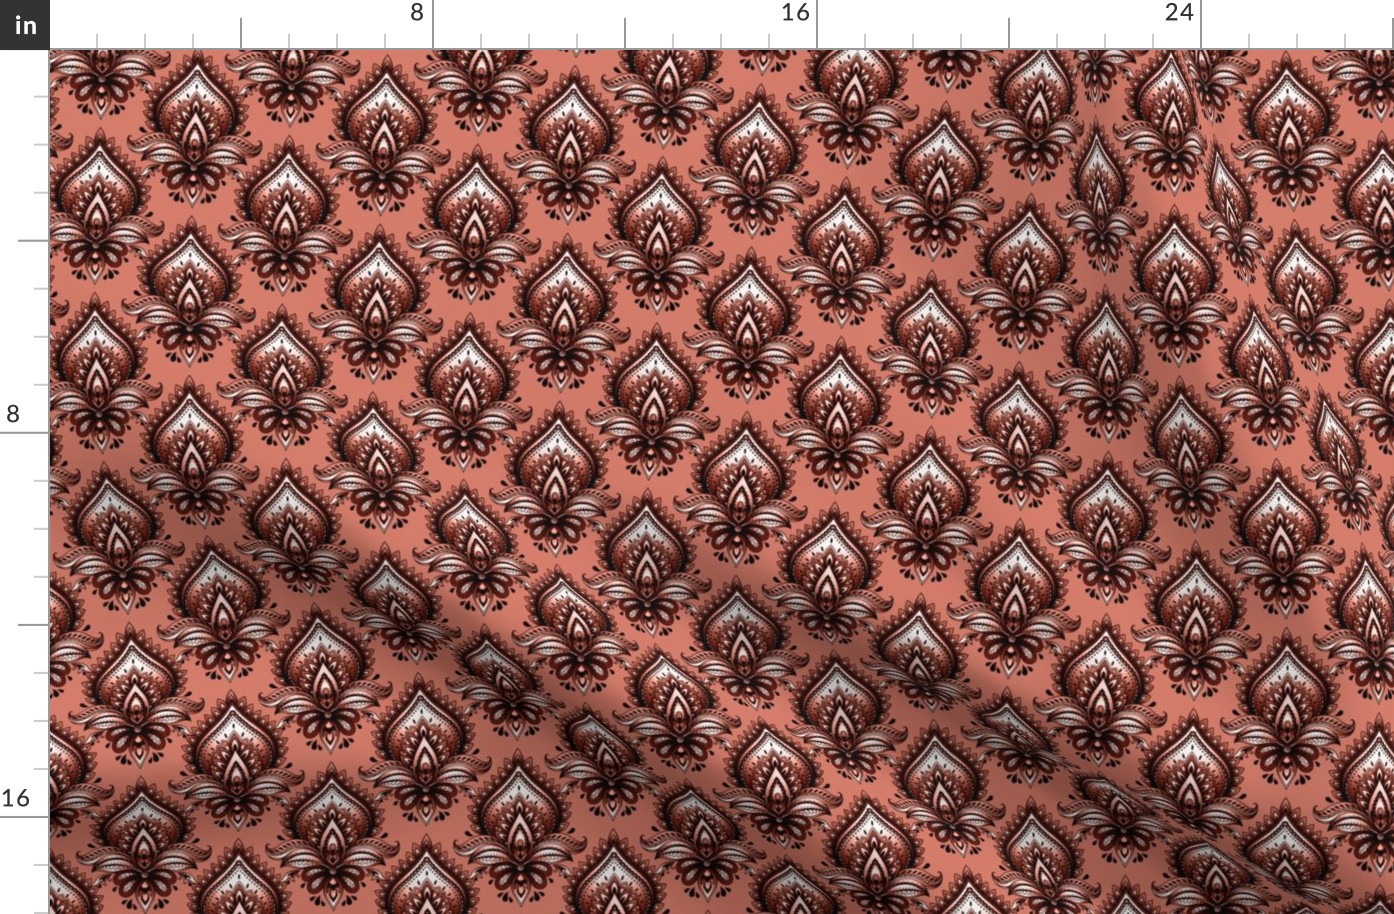 Shimmering Paisley Damask in Aged Terra Cotta Monochrome - Coordinate